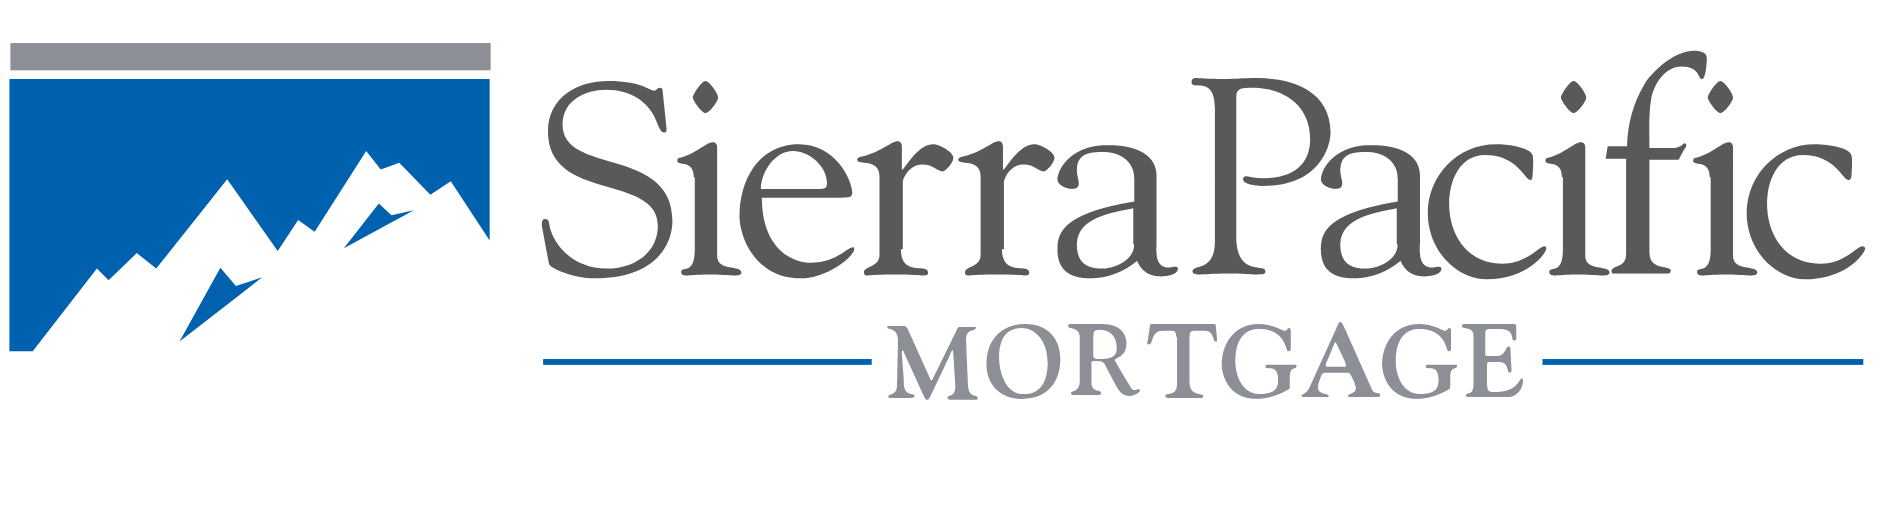 Sierra Pacific Mortgage Debuts Builder Division